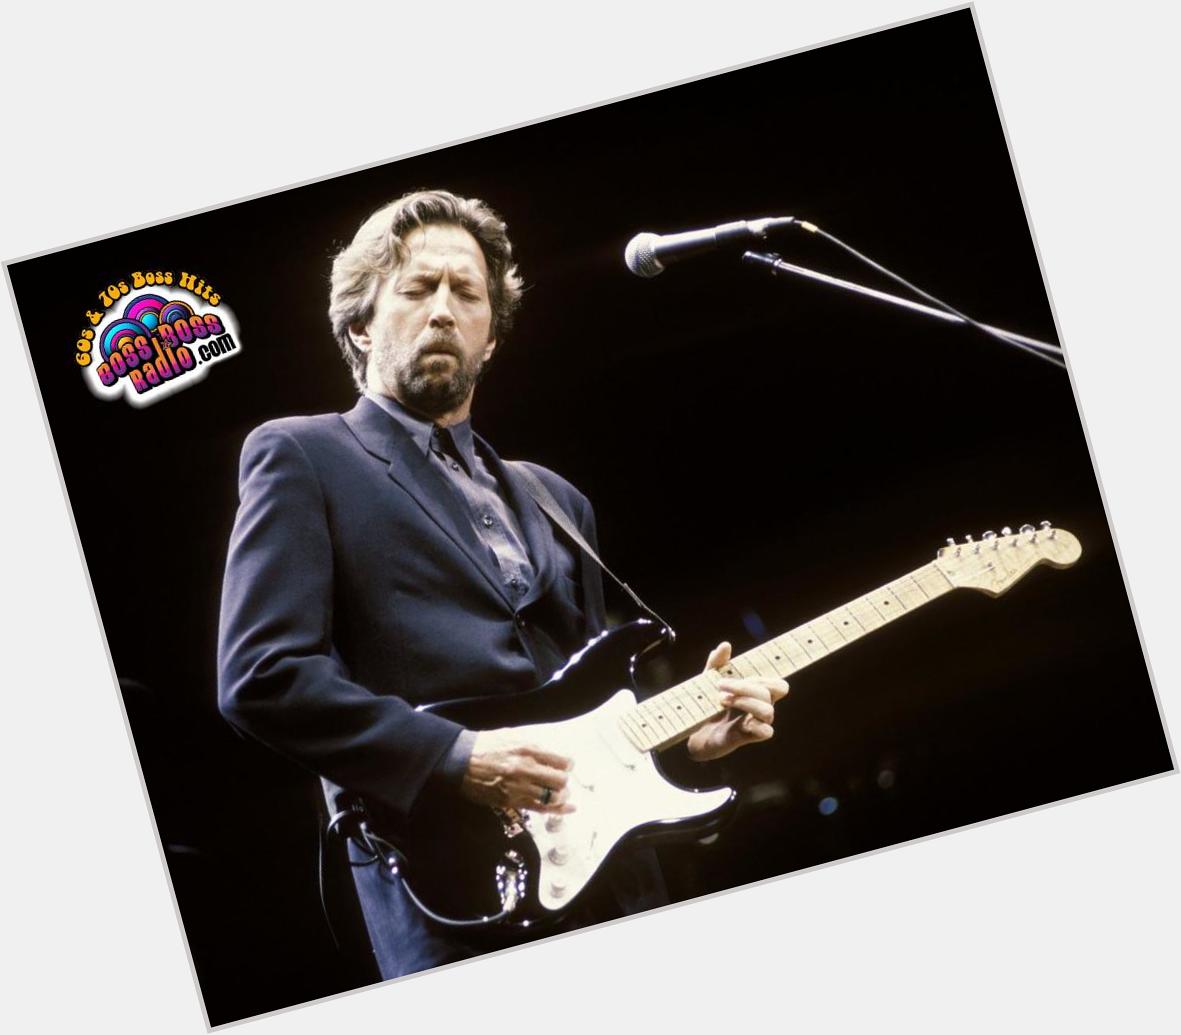  wishes a Big Boss Happy Birthday to Eric Clapton today, celebrating the big 70!  